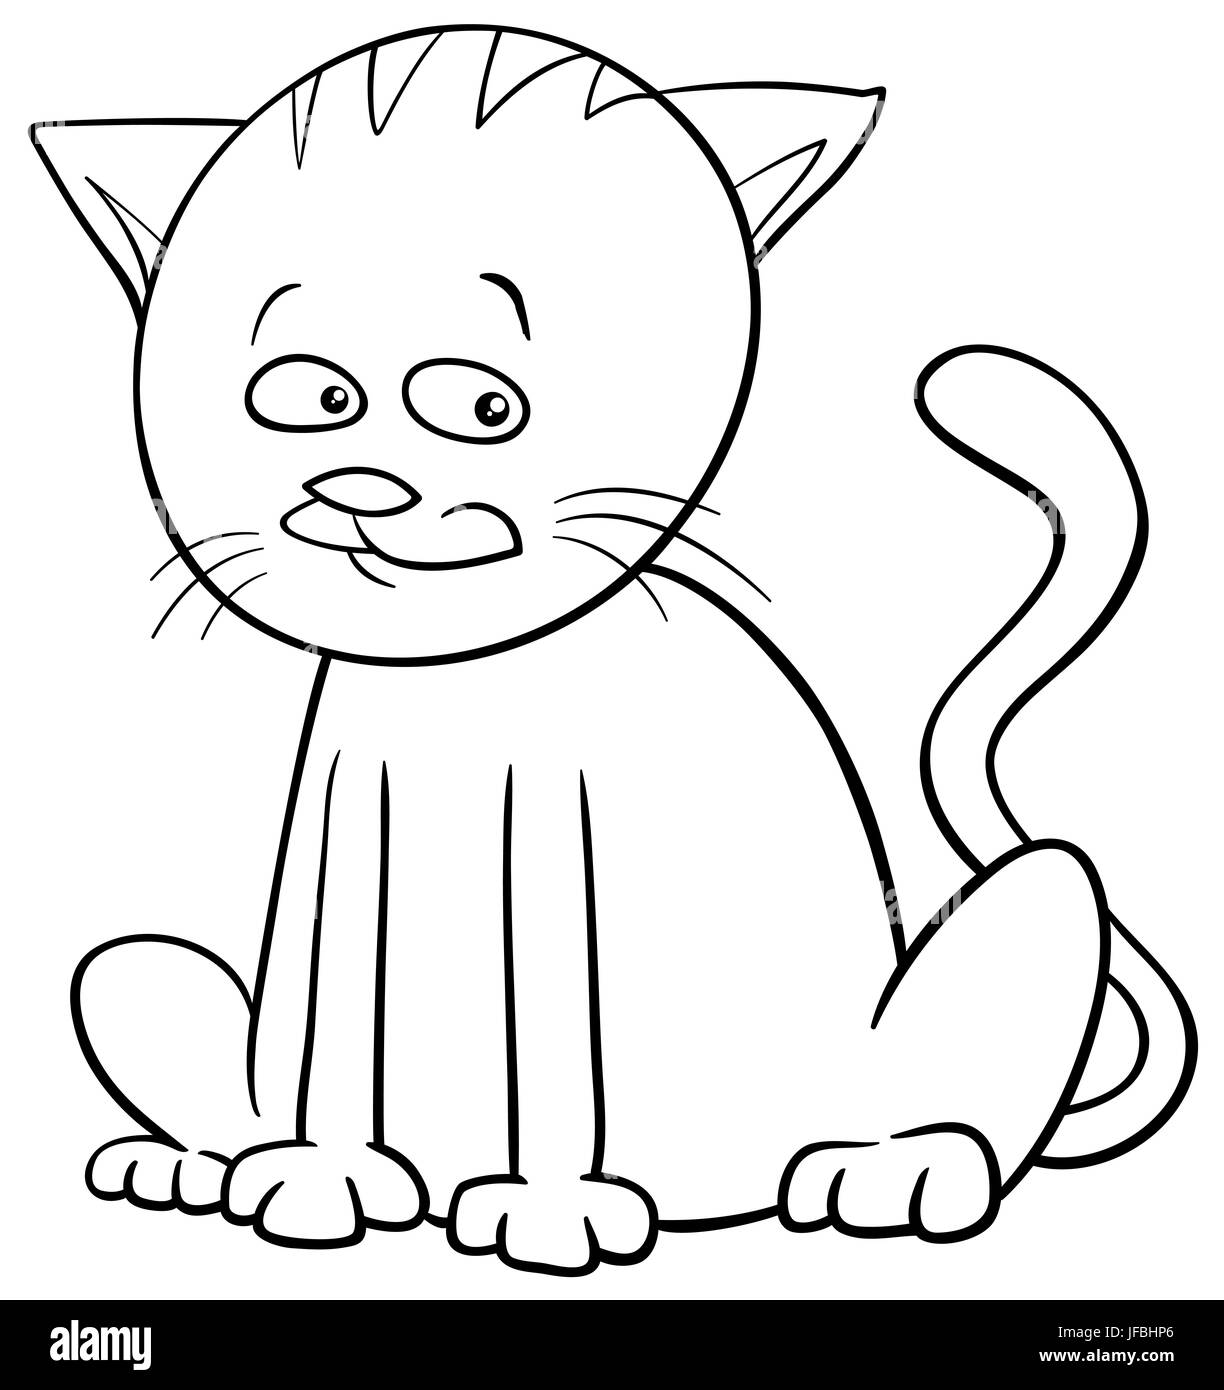 cat character coloring page Stock Photo